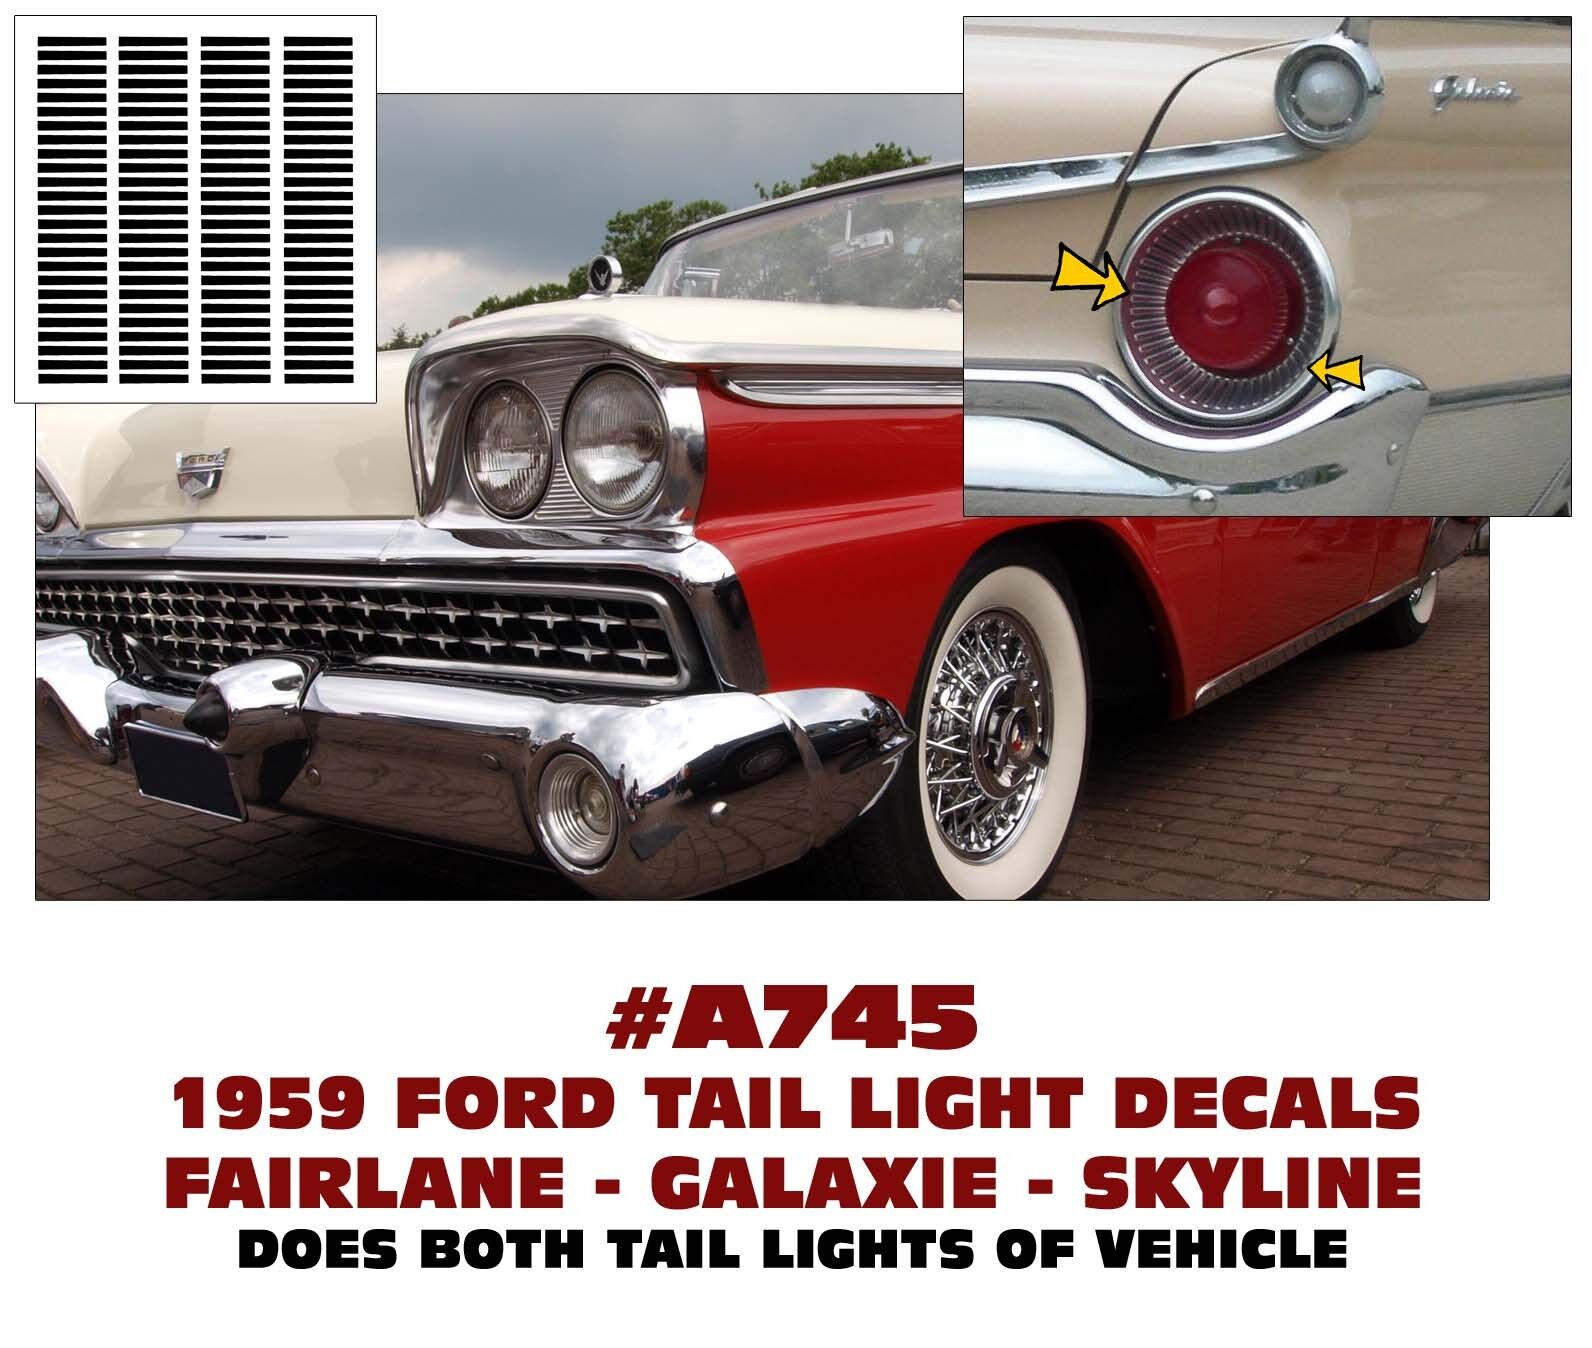 A745 1959 FORD FAIRLANE - GALAXIE - SKYLINE - TAIL LIGHT DECAL STICKER KIT